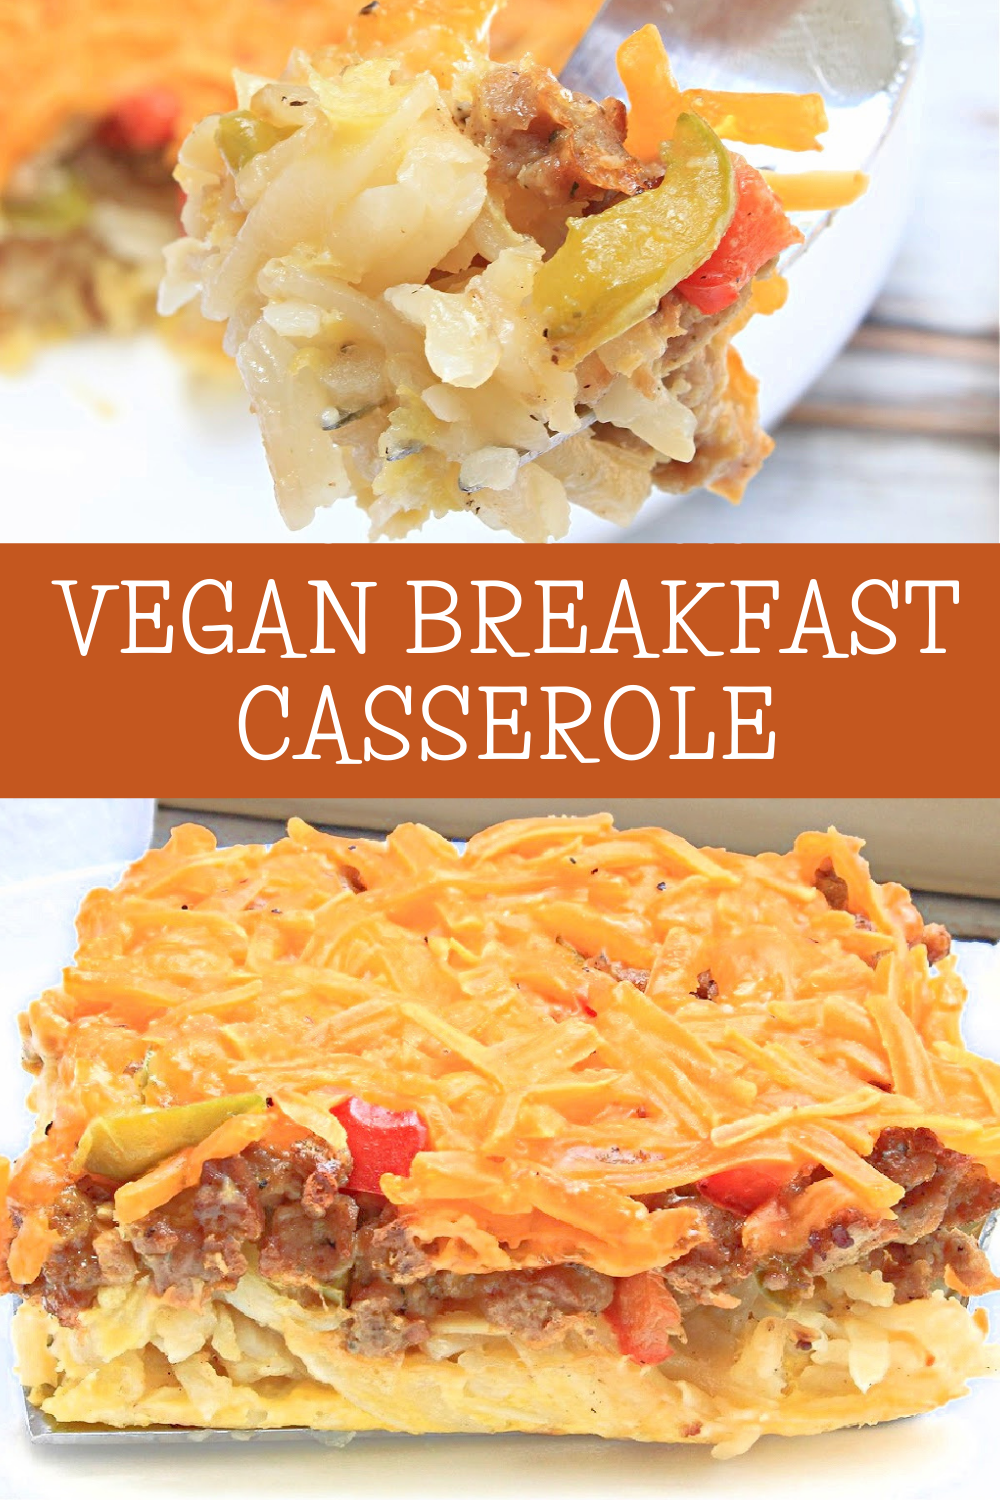 Vegan Breakfast Casserole ~  Easy breakfast casserole made with JUST Egg. Perfect Christmas morning or weekend brunch! Make-ahead option! via @thiswifecooks